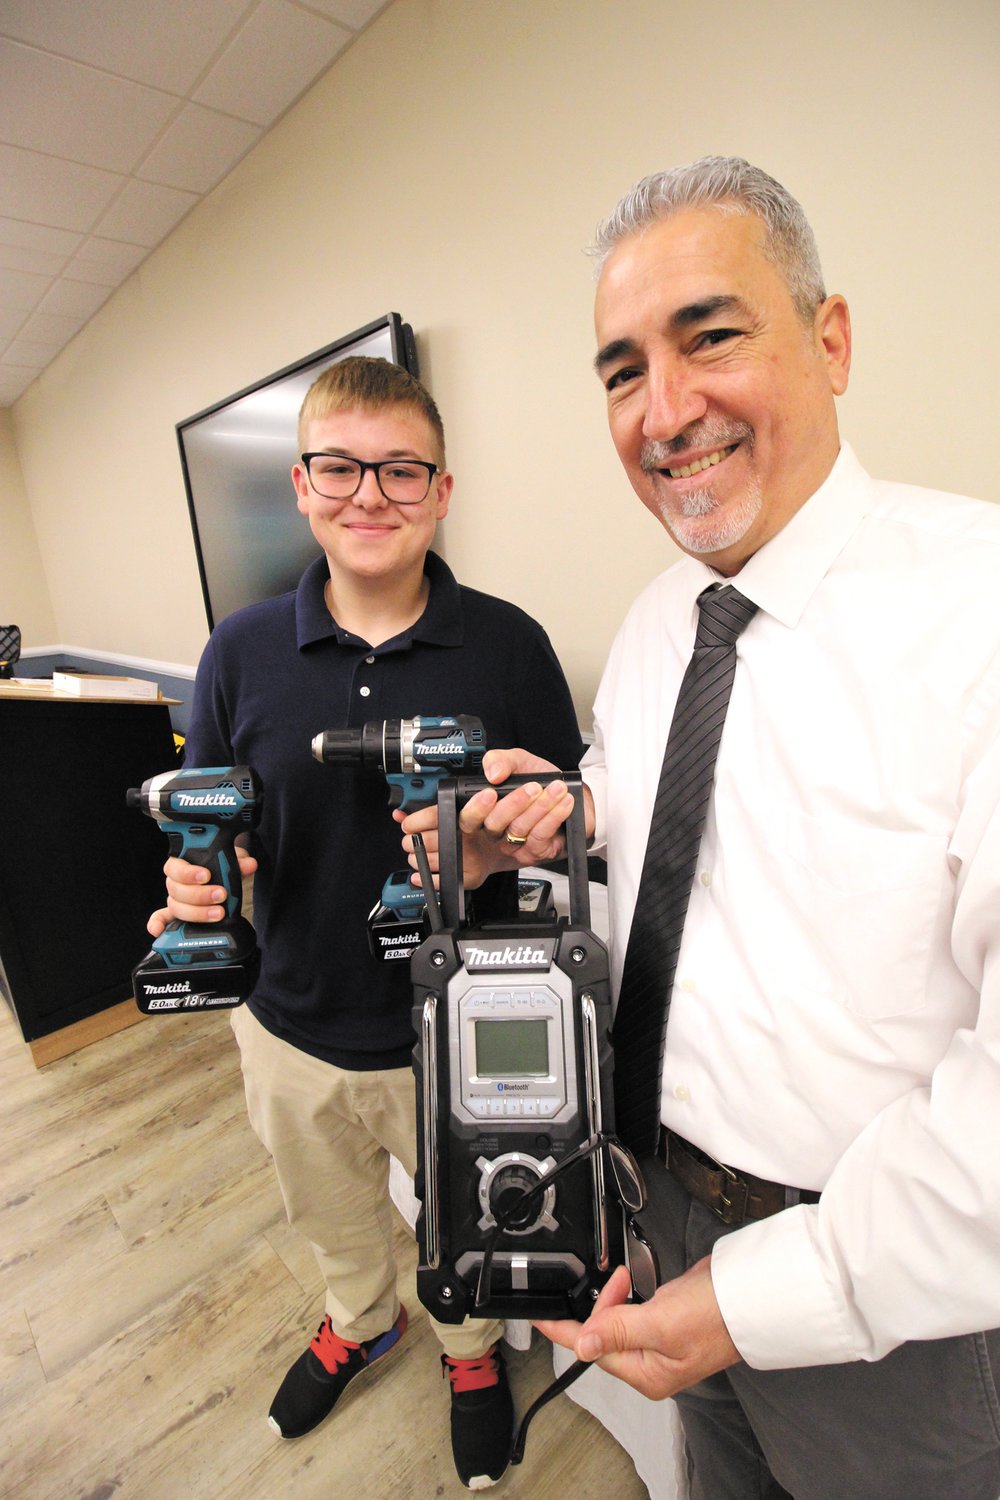 JUST WHAT HE CAN USE: Joseph LeBelle was delighted to receive electrical tools, donated by Netcoh Sales from Wayne Pimental who ran Thursday’s program at the Tides Restaurant at the Warwick Area Career and Technical Center.